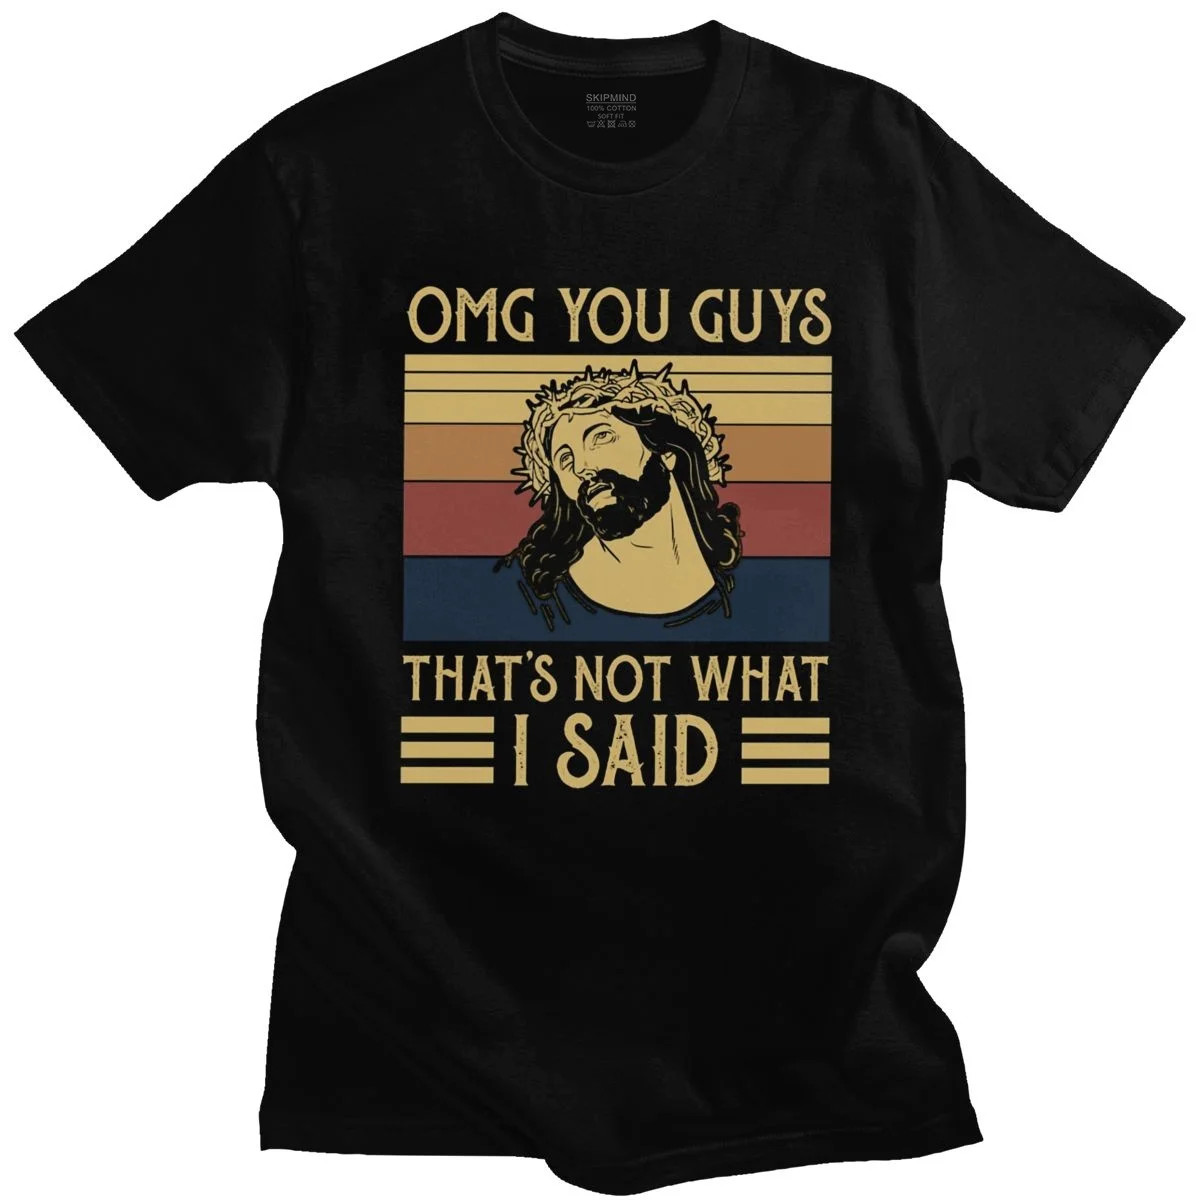 

You Guys That's Not What I Said Men T Shirt Cotton God Christian Jesus Christ Tees Vintage Short Sleeve Casual Tshirt Oversize